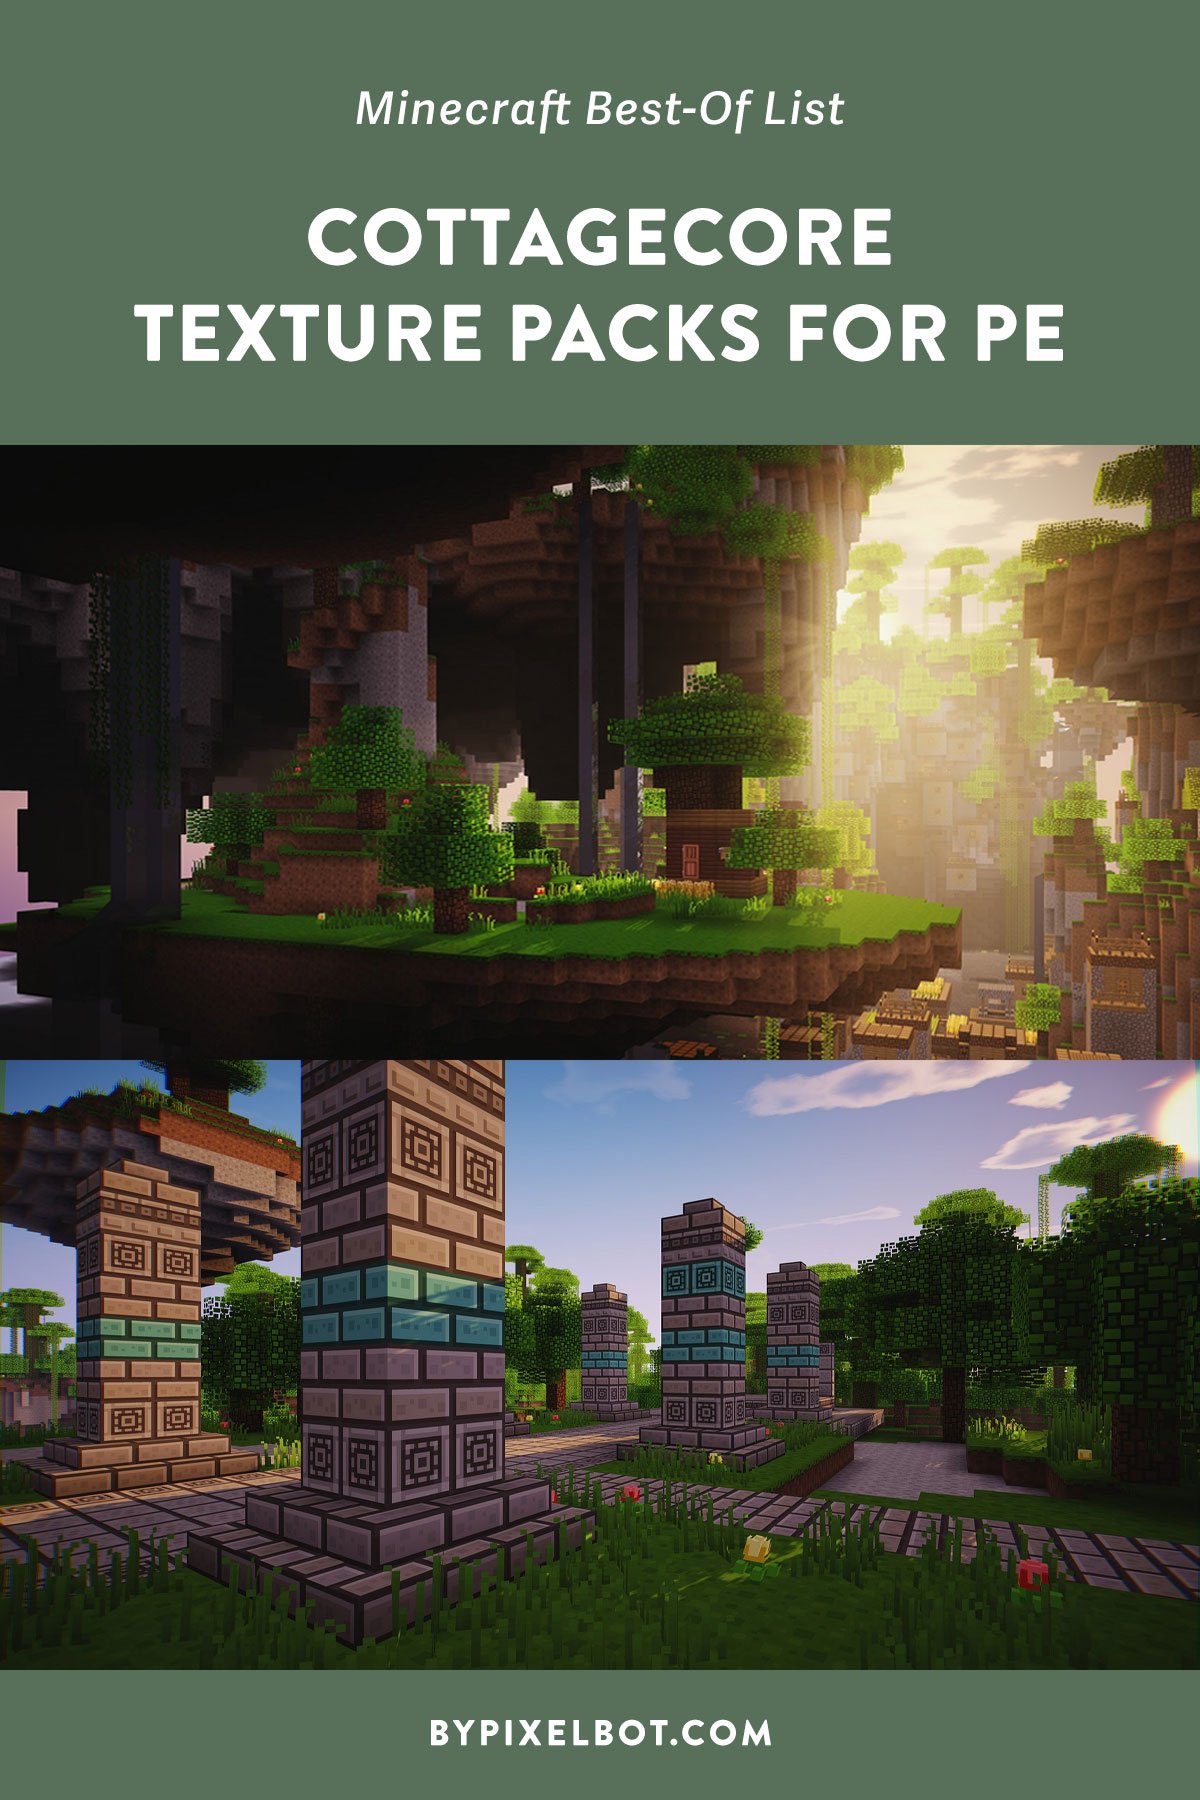 Try the new Bedrock Textures